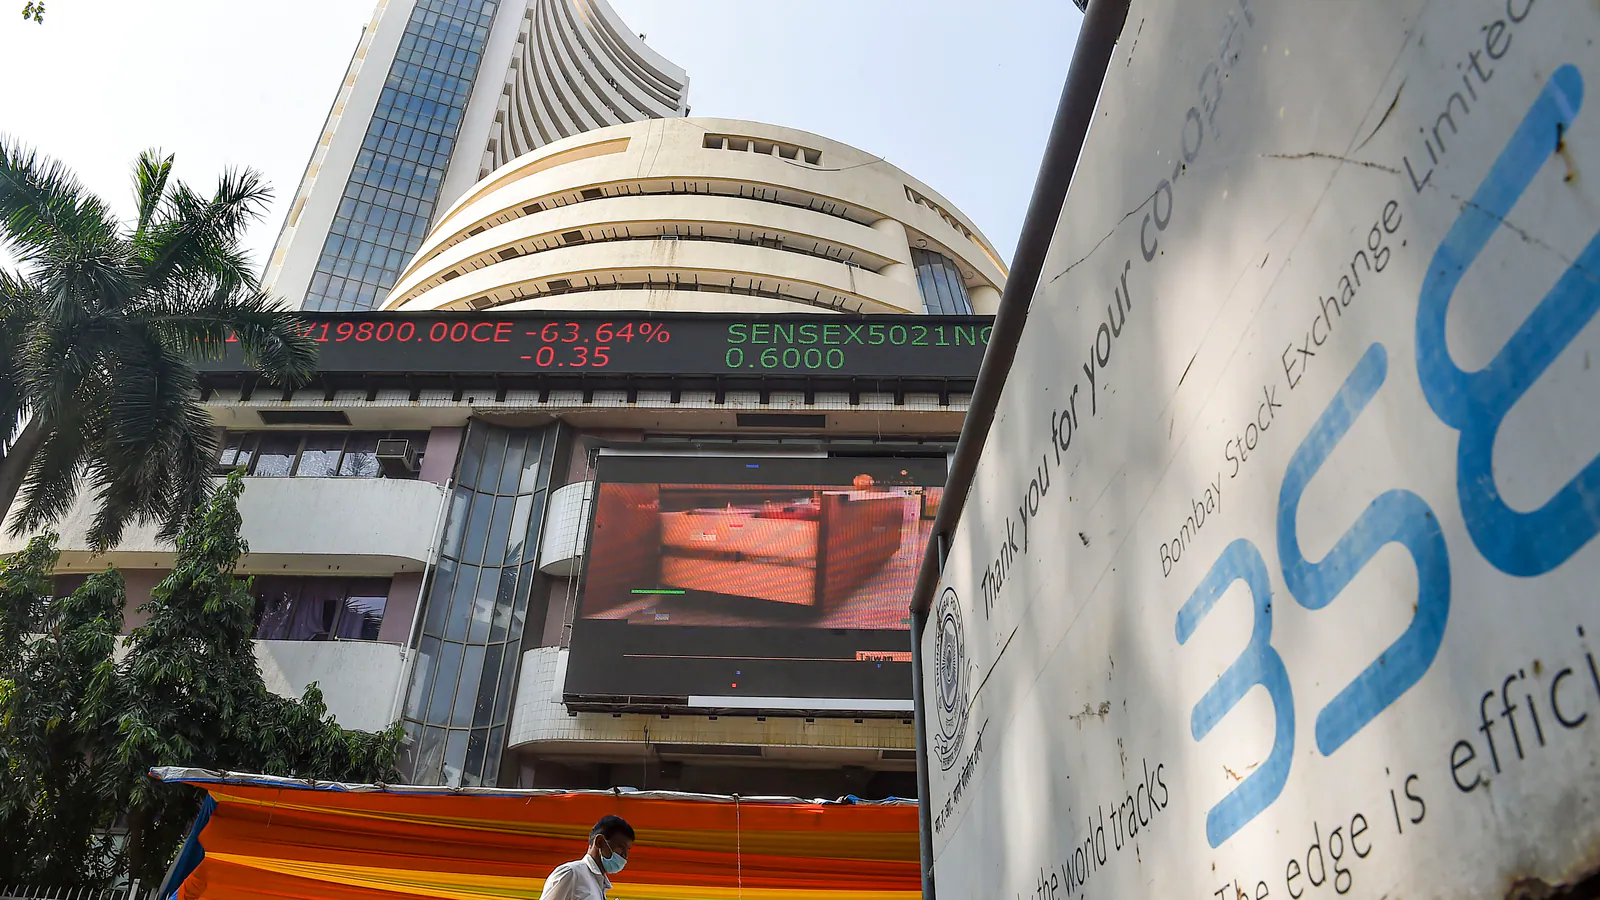 Sensex trades flat at 60k in opening bell, Nifty slightly over 18k mark